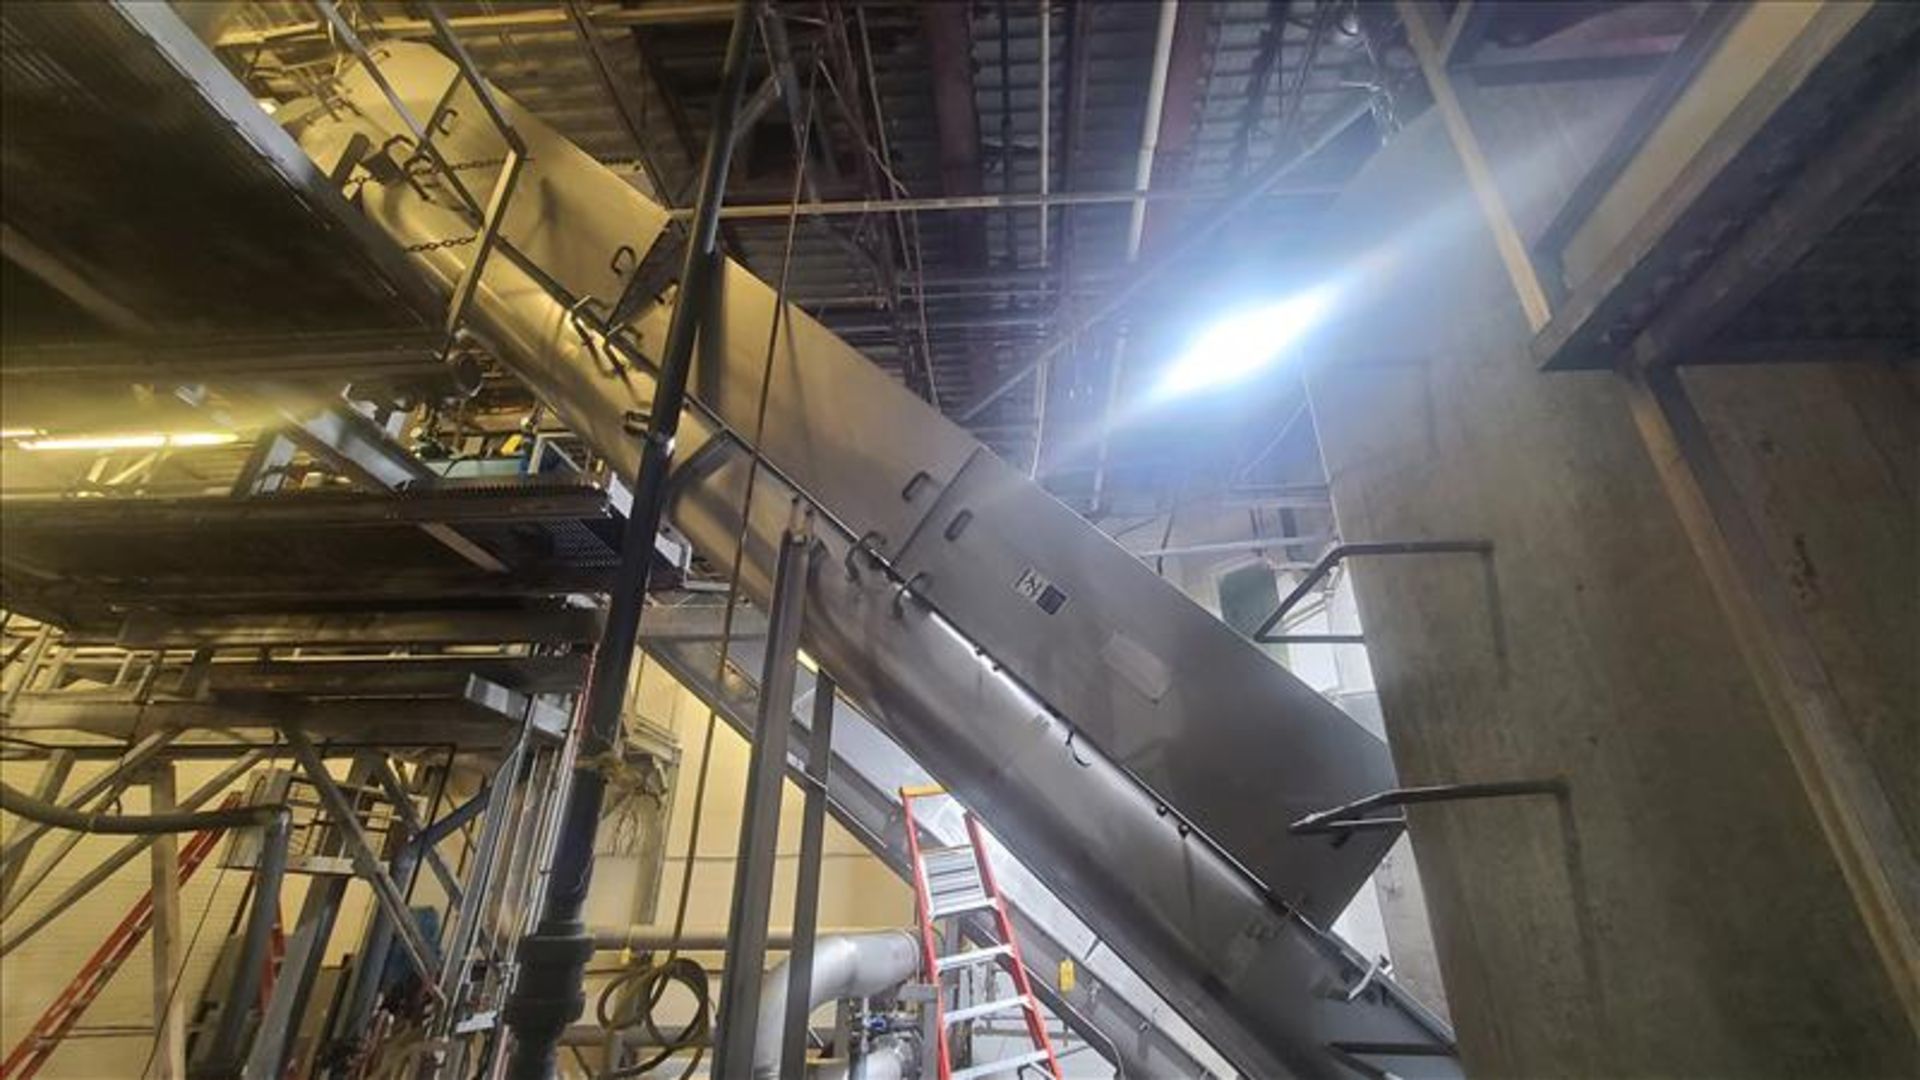 Atara screw conveyor, mod. AE-U355, inclined, power, approx. 12 in. dia. X 26 ft., stainless steel - Image 2 of 4